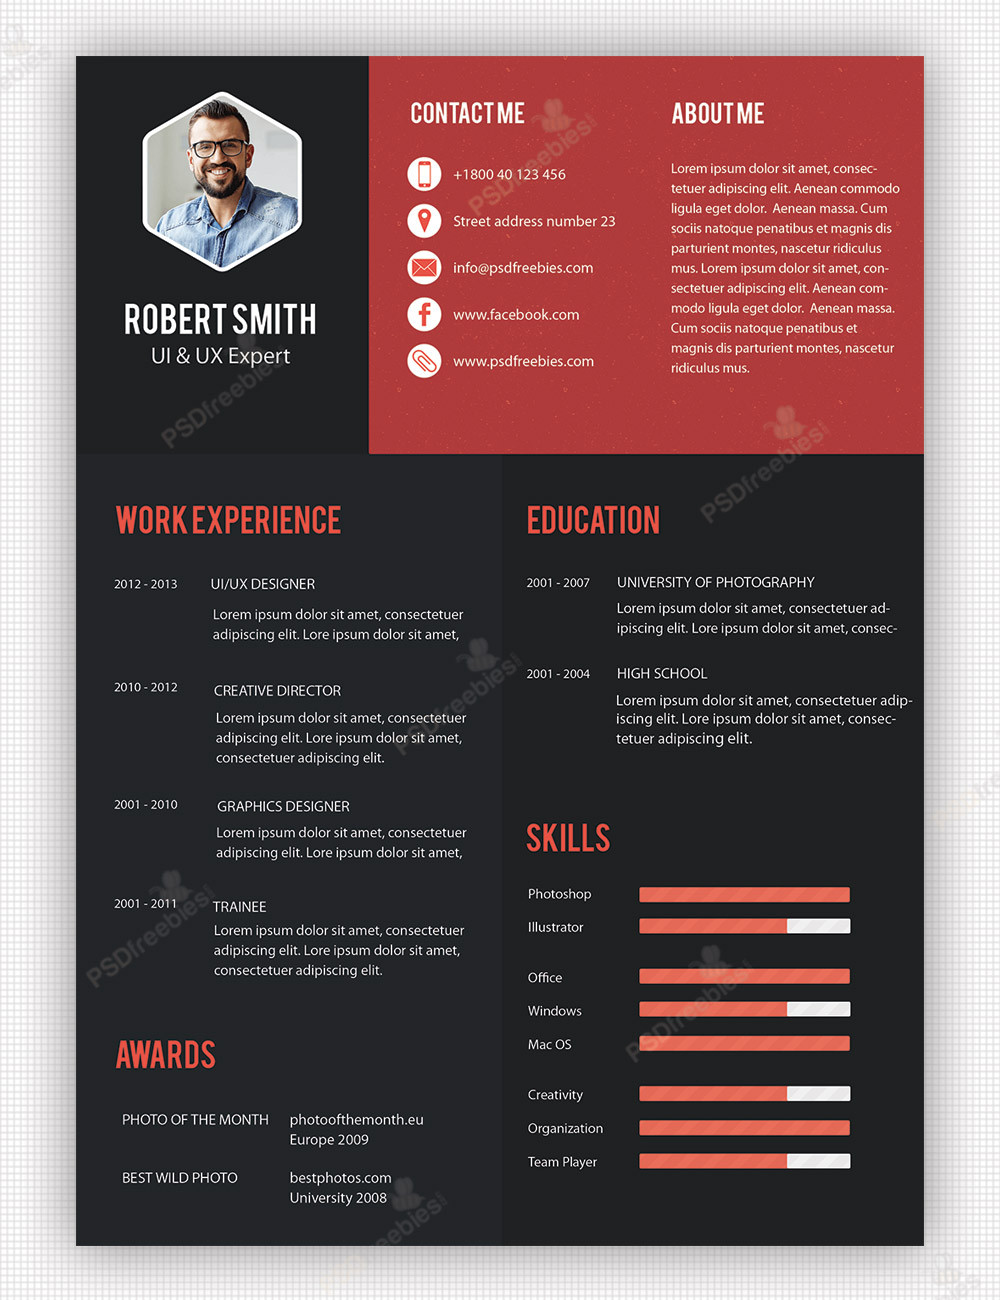 Creative Resume Templates for Freshers Free Download Creative Professional Resume Template Free Psd â Psdfreebies.com